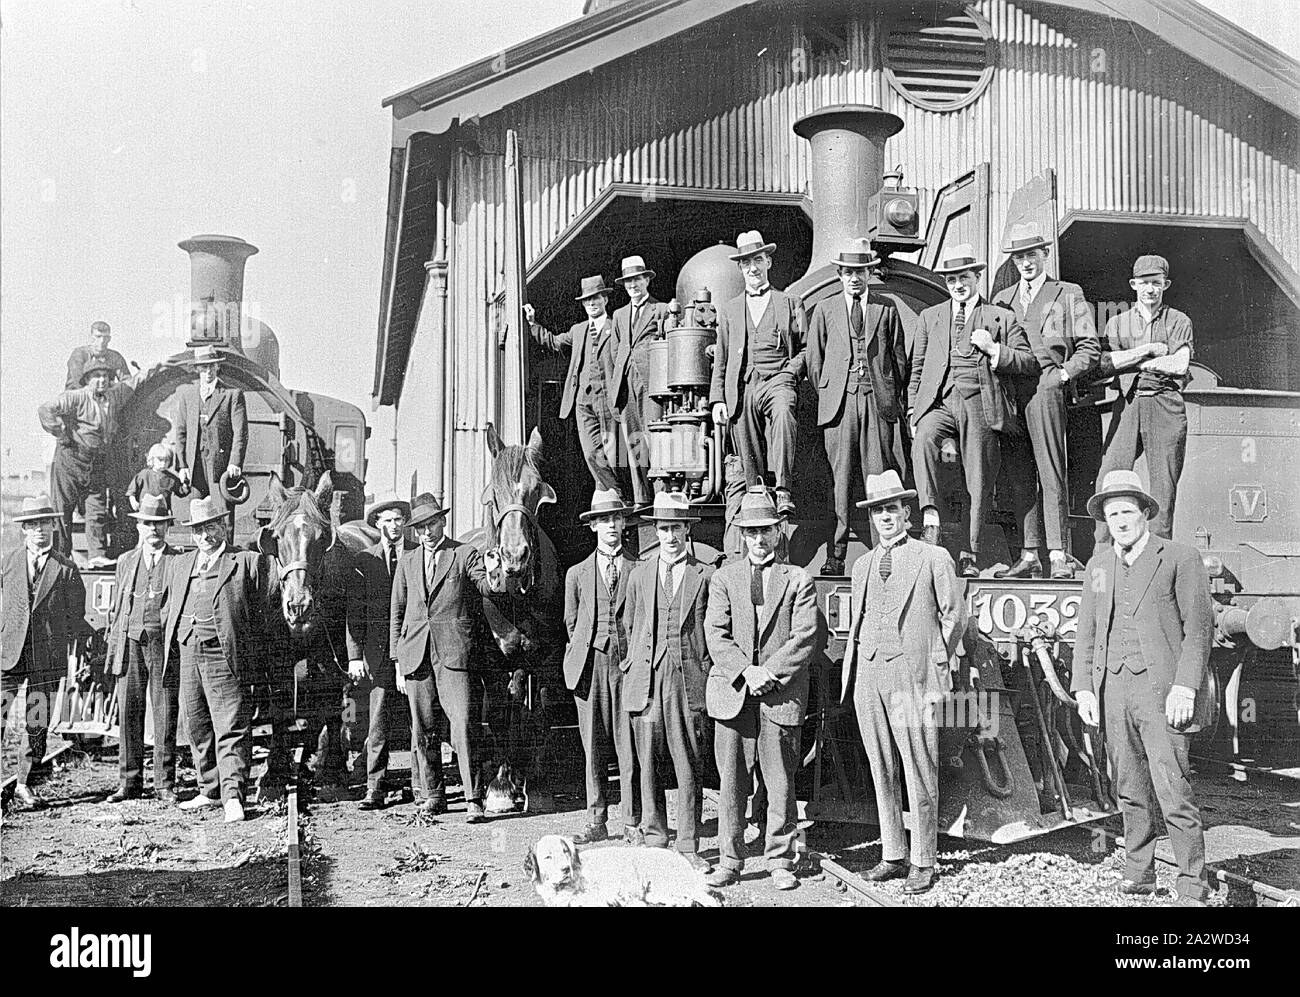 Negative - Victorian Railways Locomotive Crews & Engineers Posed With Three Locomotives at Portland Loco Depot, Victoria, circa 1921, Loco crew members and railway engineers posed with three locomotives at Portland loco depot. The engineers all wear suits and hats. Two horses and a dog are also posed. The tender of a V-class locomotive is visible, and two Dd-class locomotives are visible in front view Stock Photo